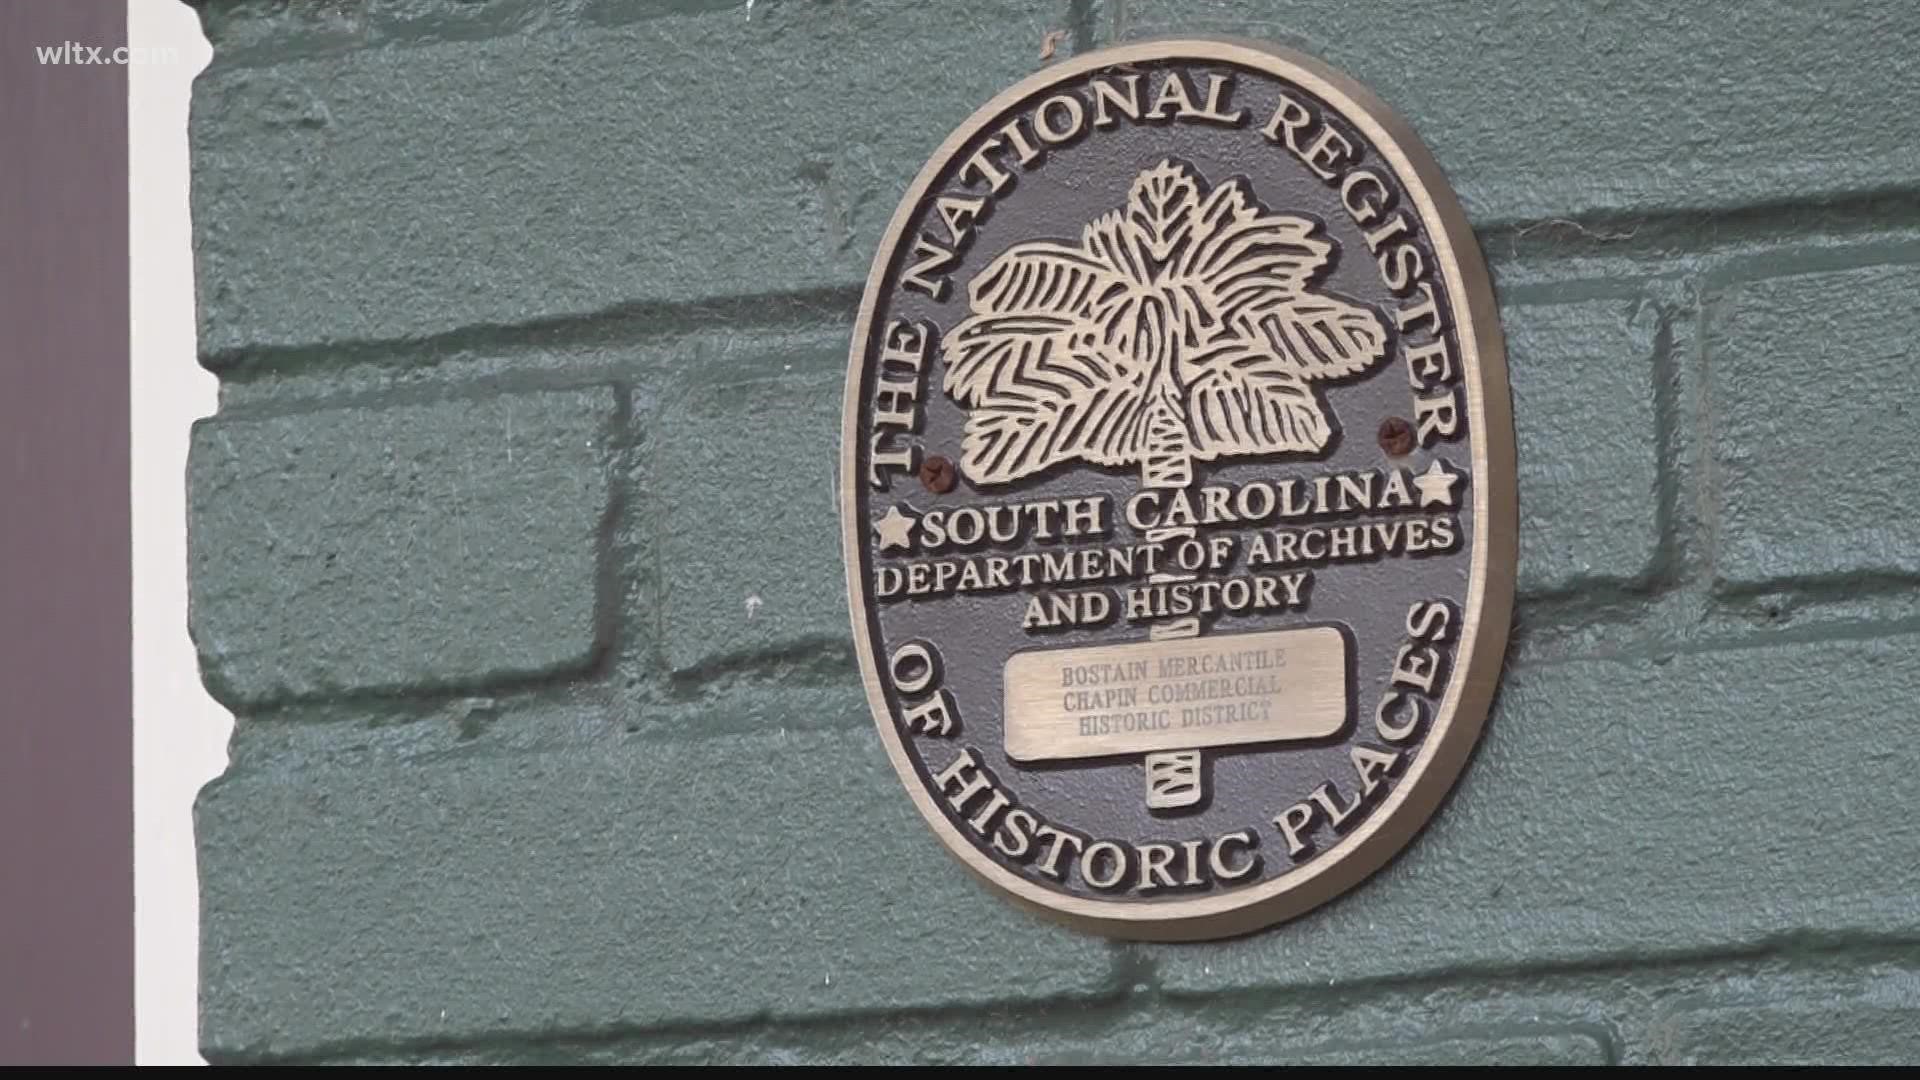 Plaques honoring the Town of Chapin's century-old history are now in place after a years-long effort to join the National Register of Historic Places.